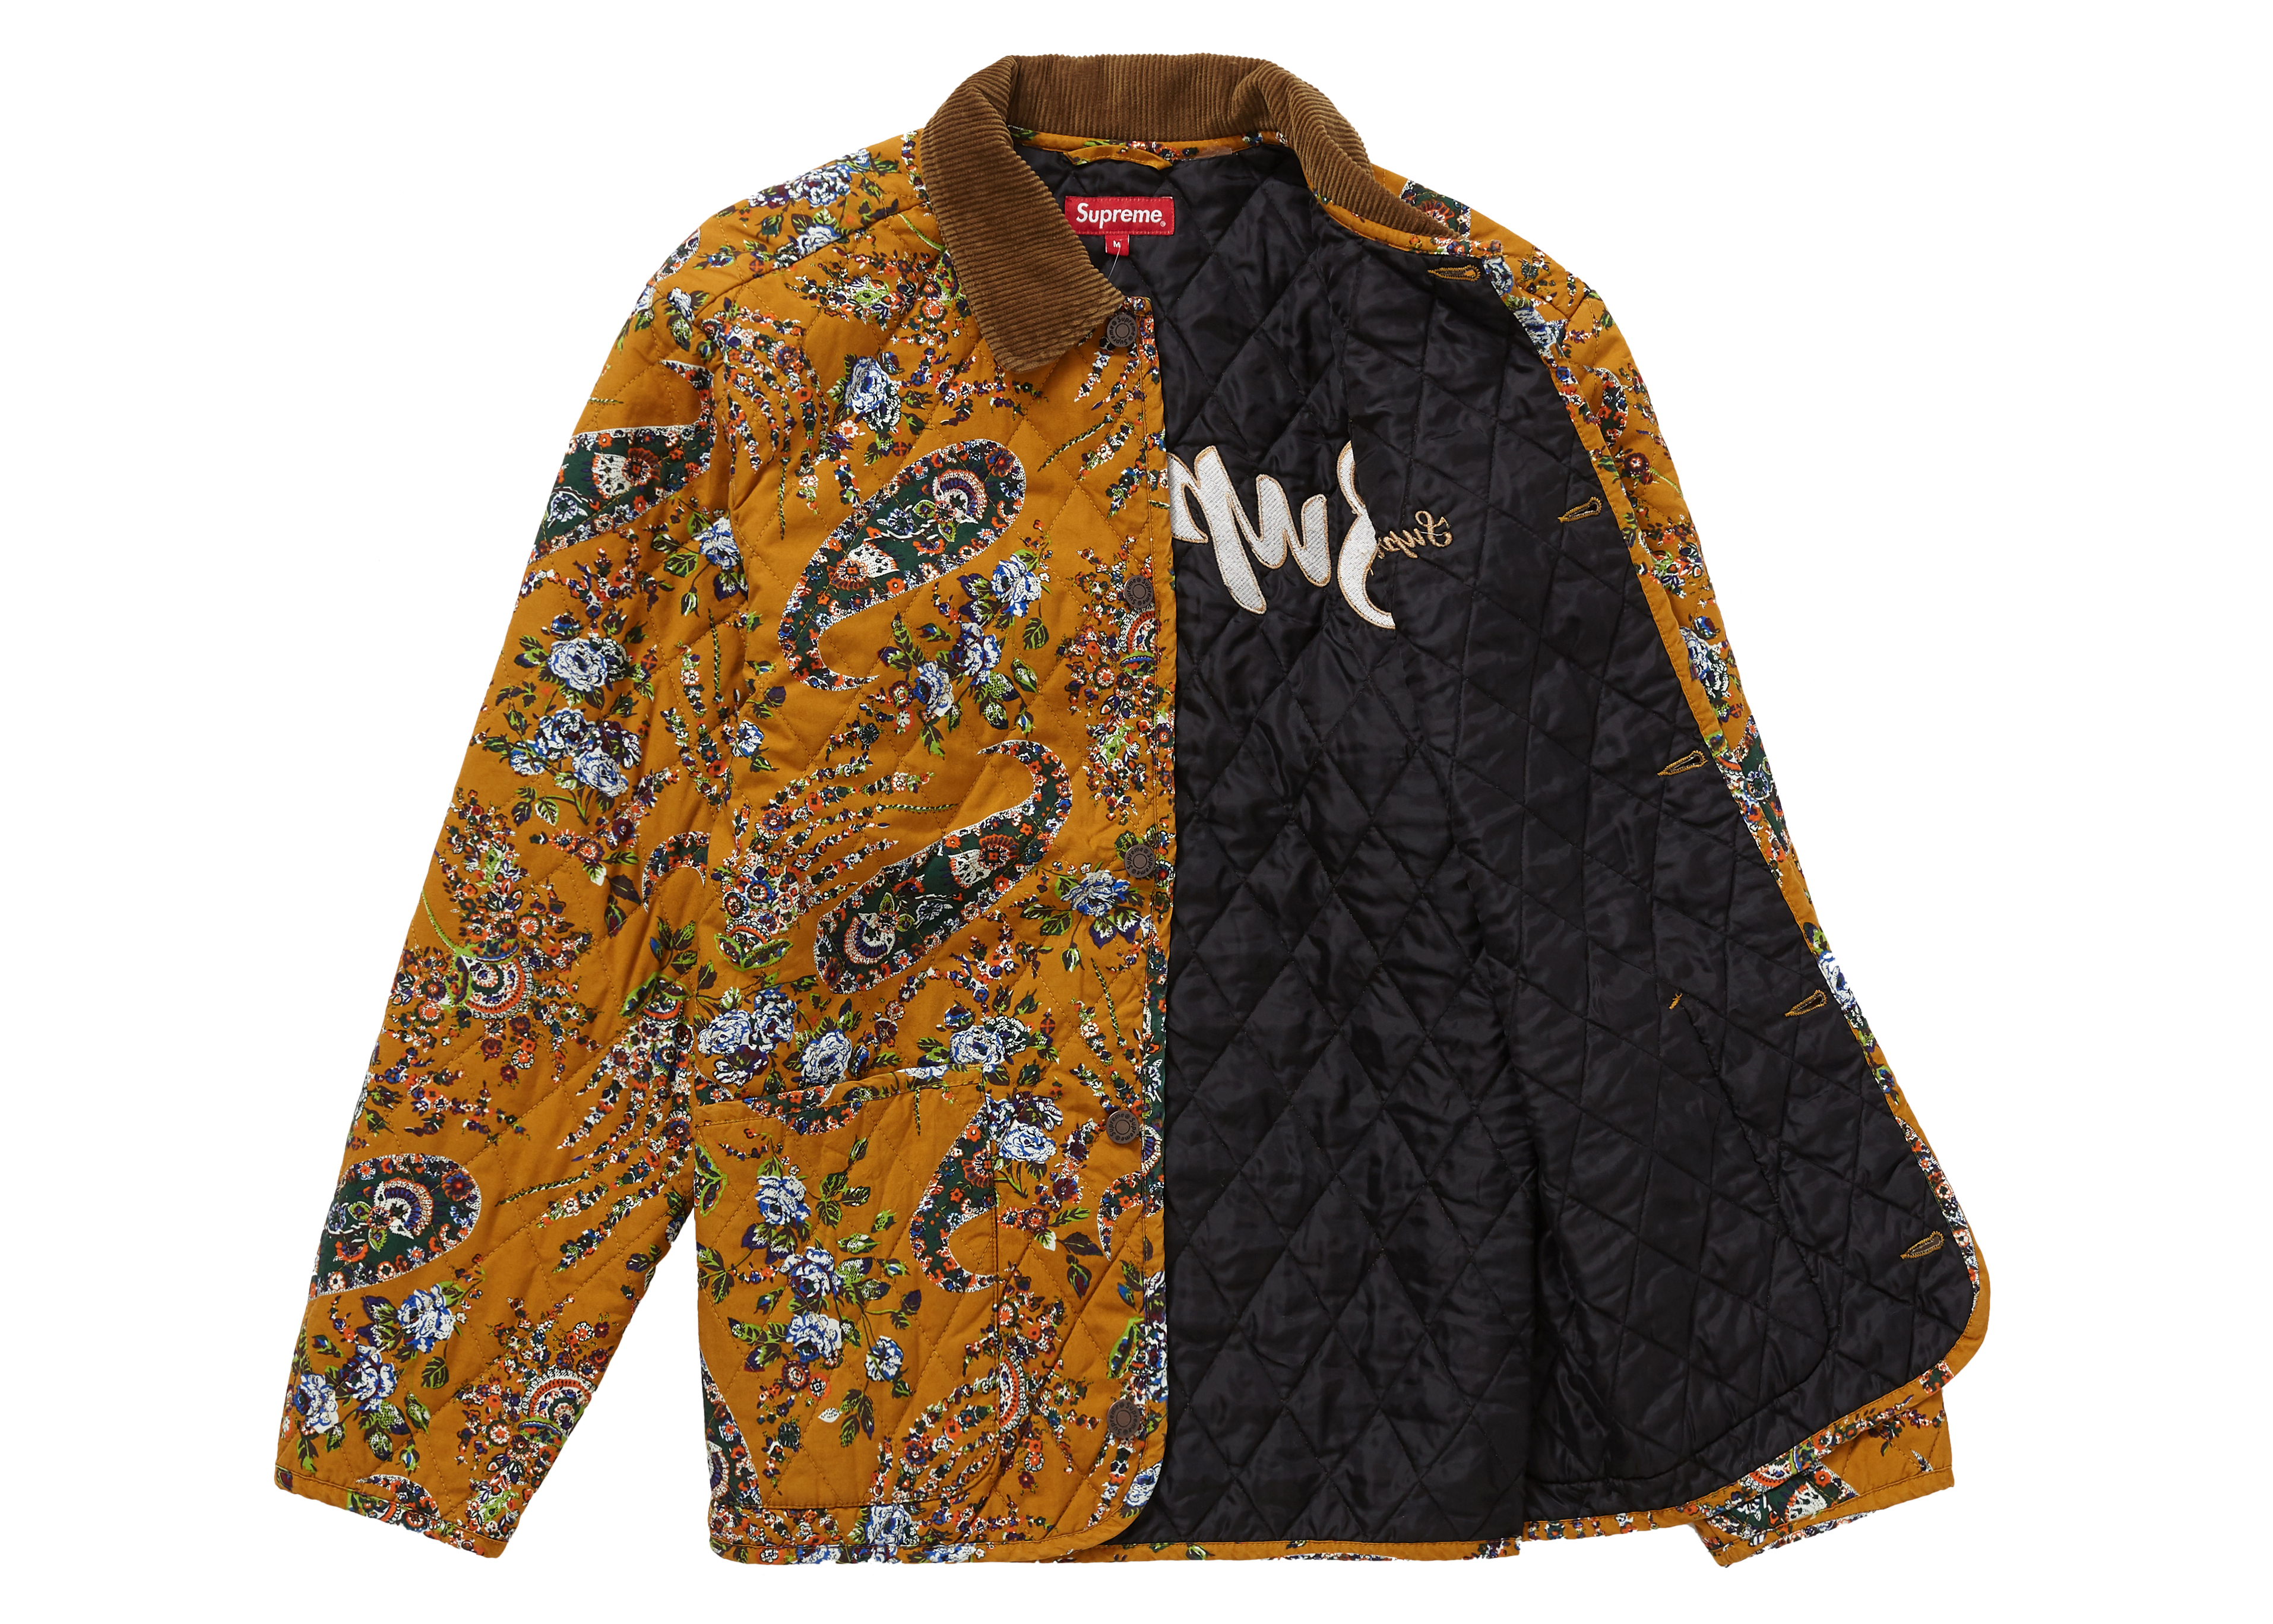 Supreme Quilted Paisley Jacket Mustard Paisley